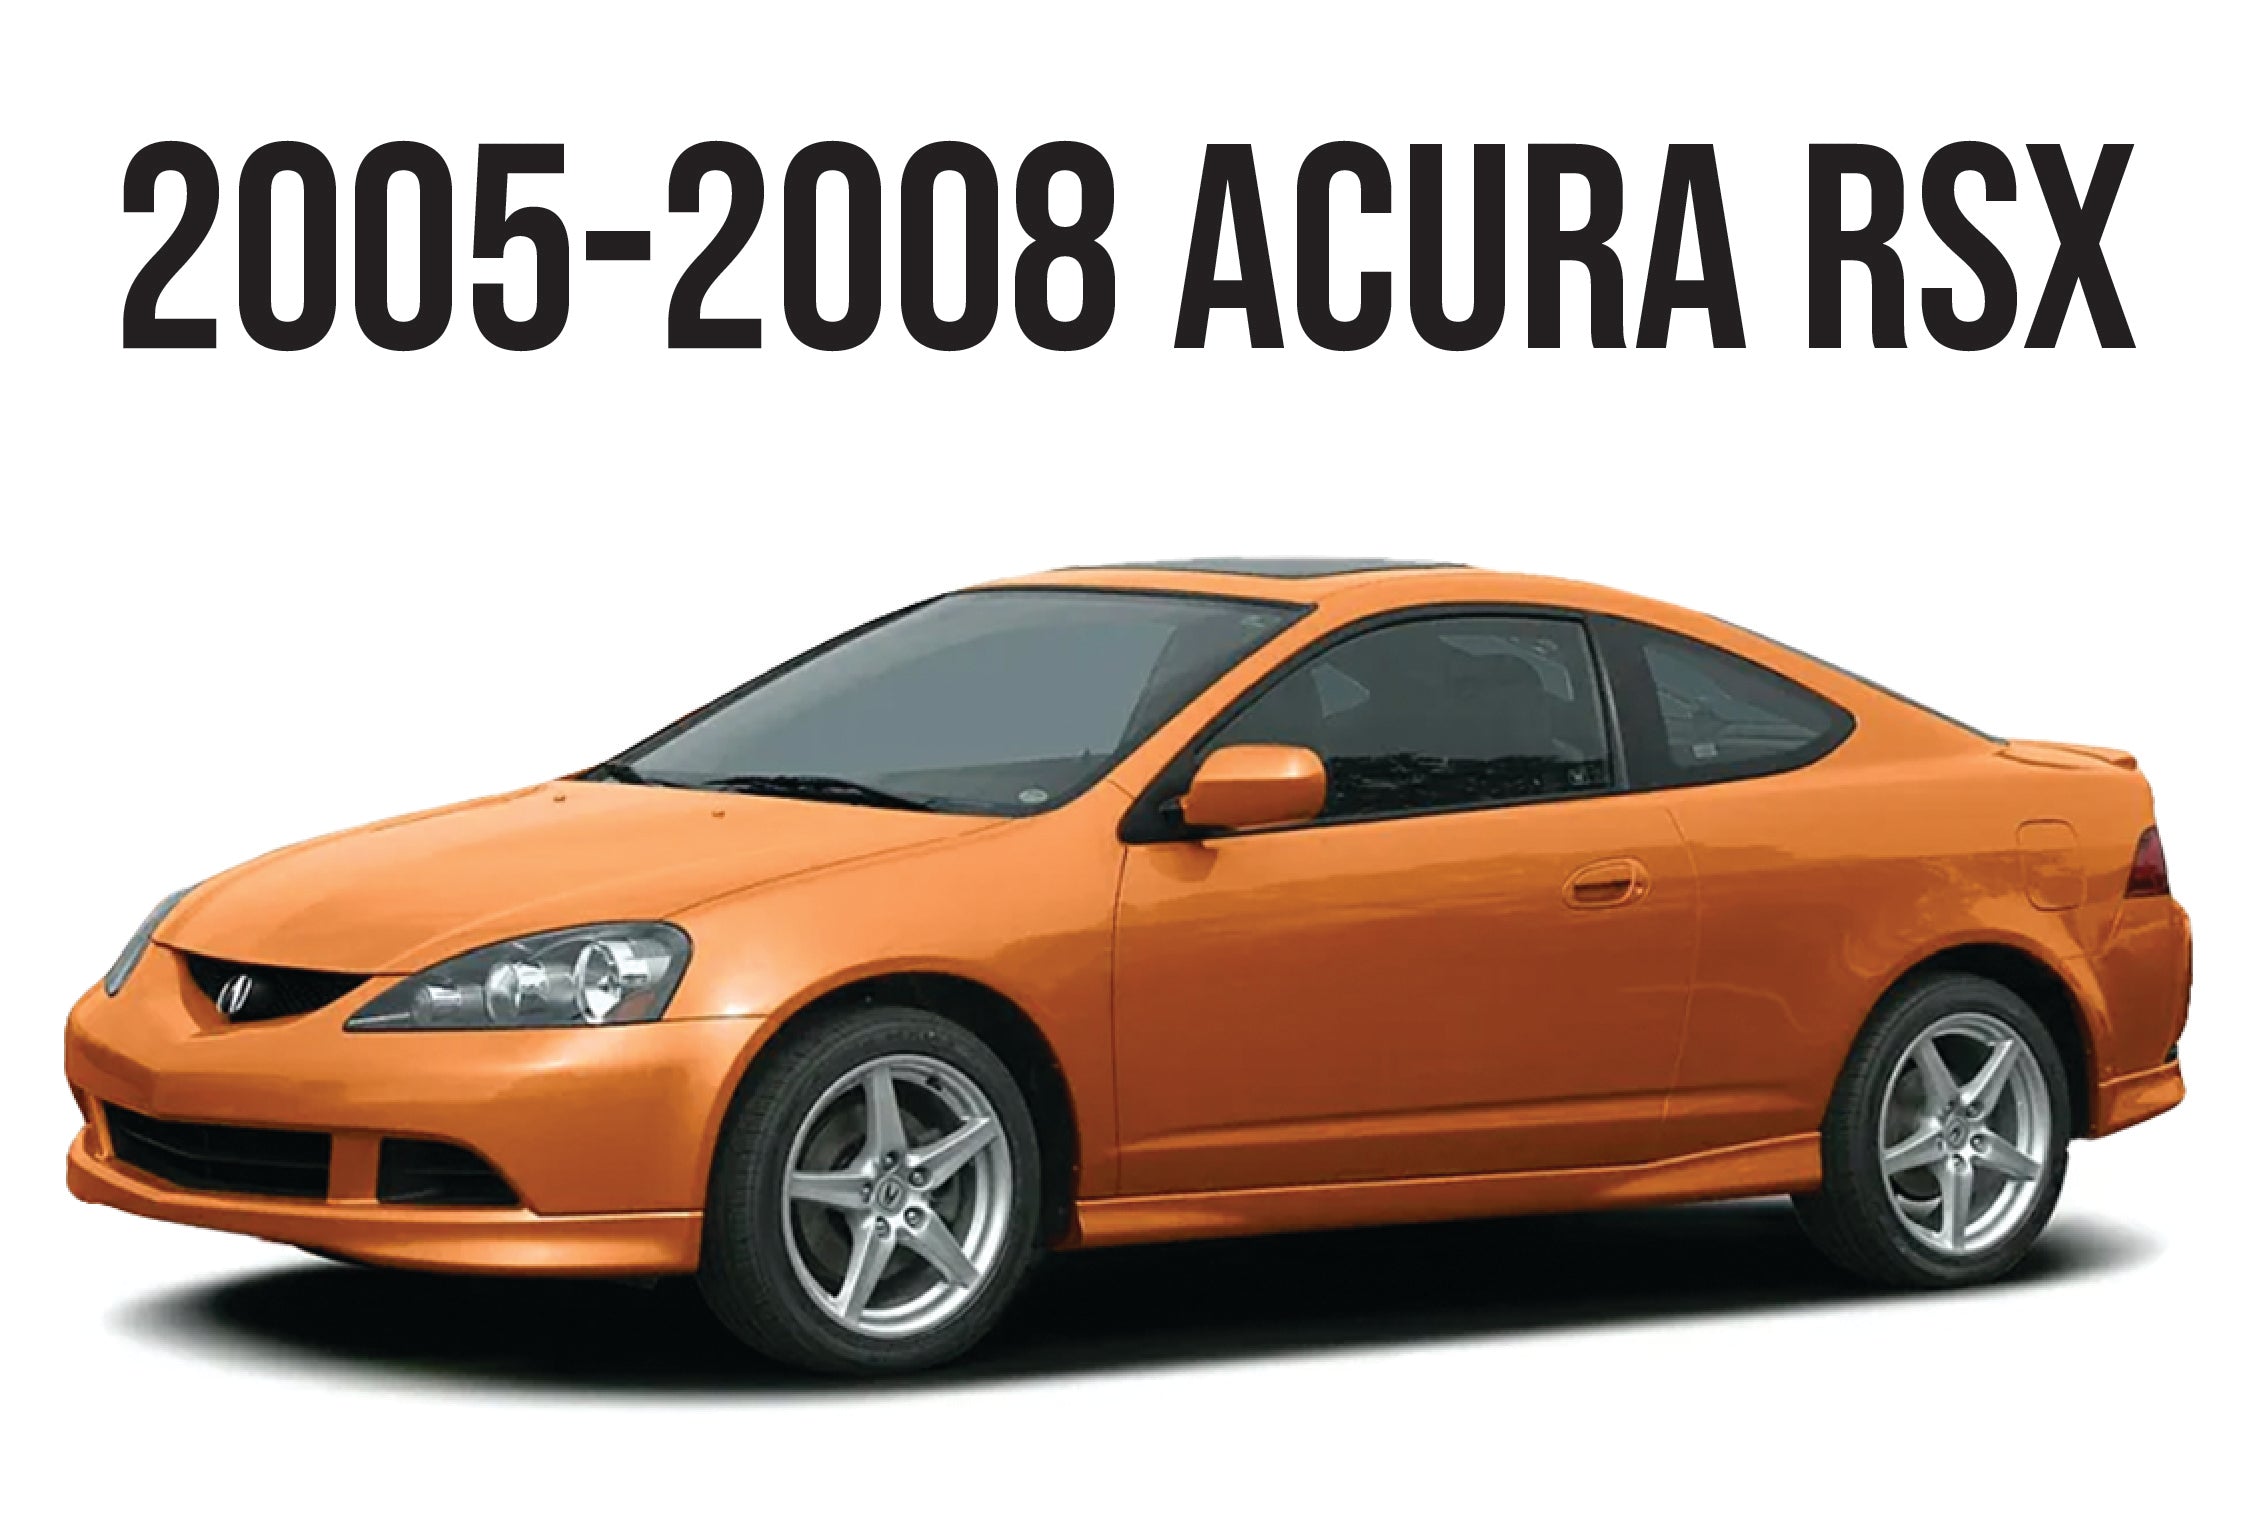 2005-2008 ACURA RSX FACELIFT